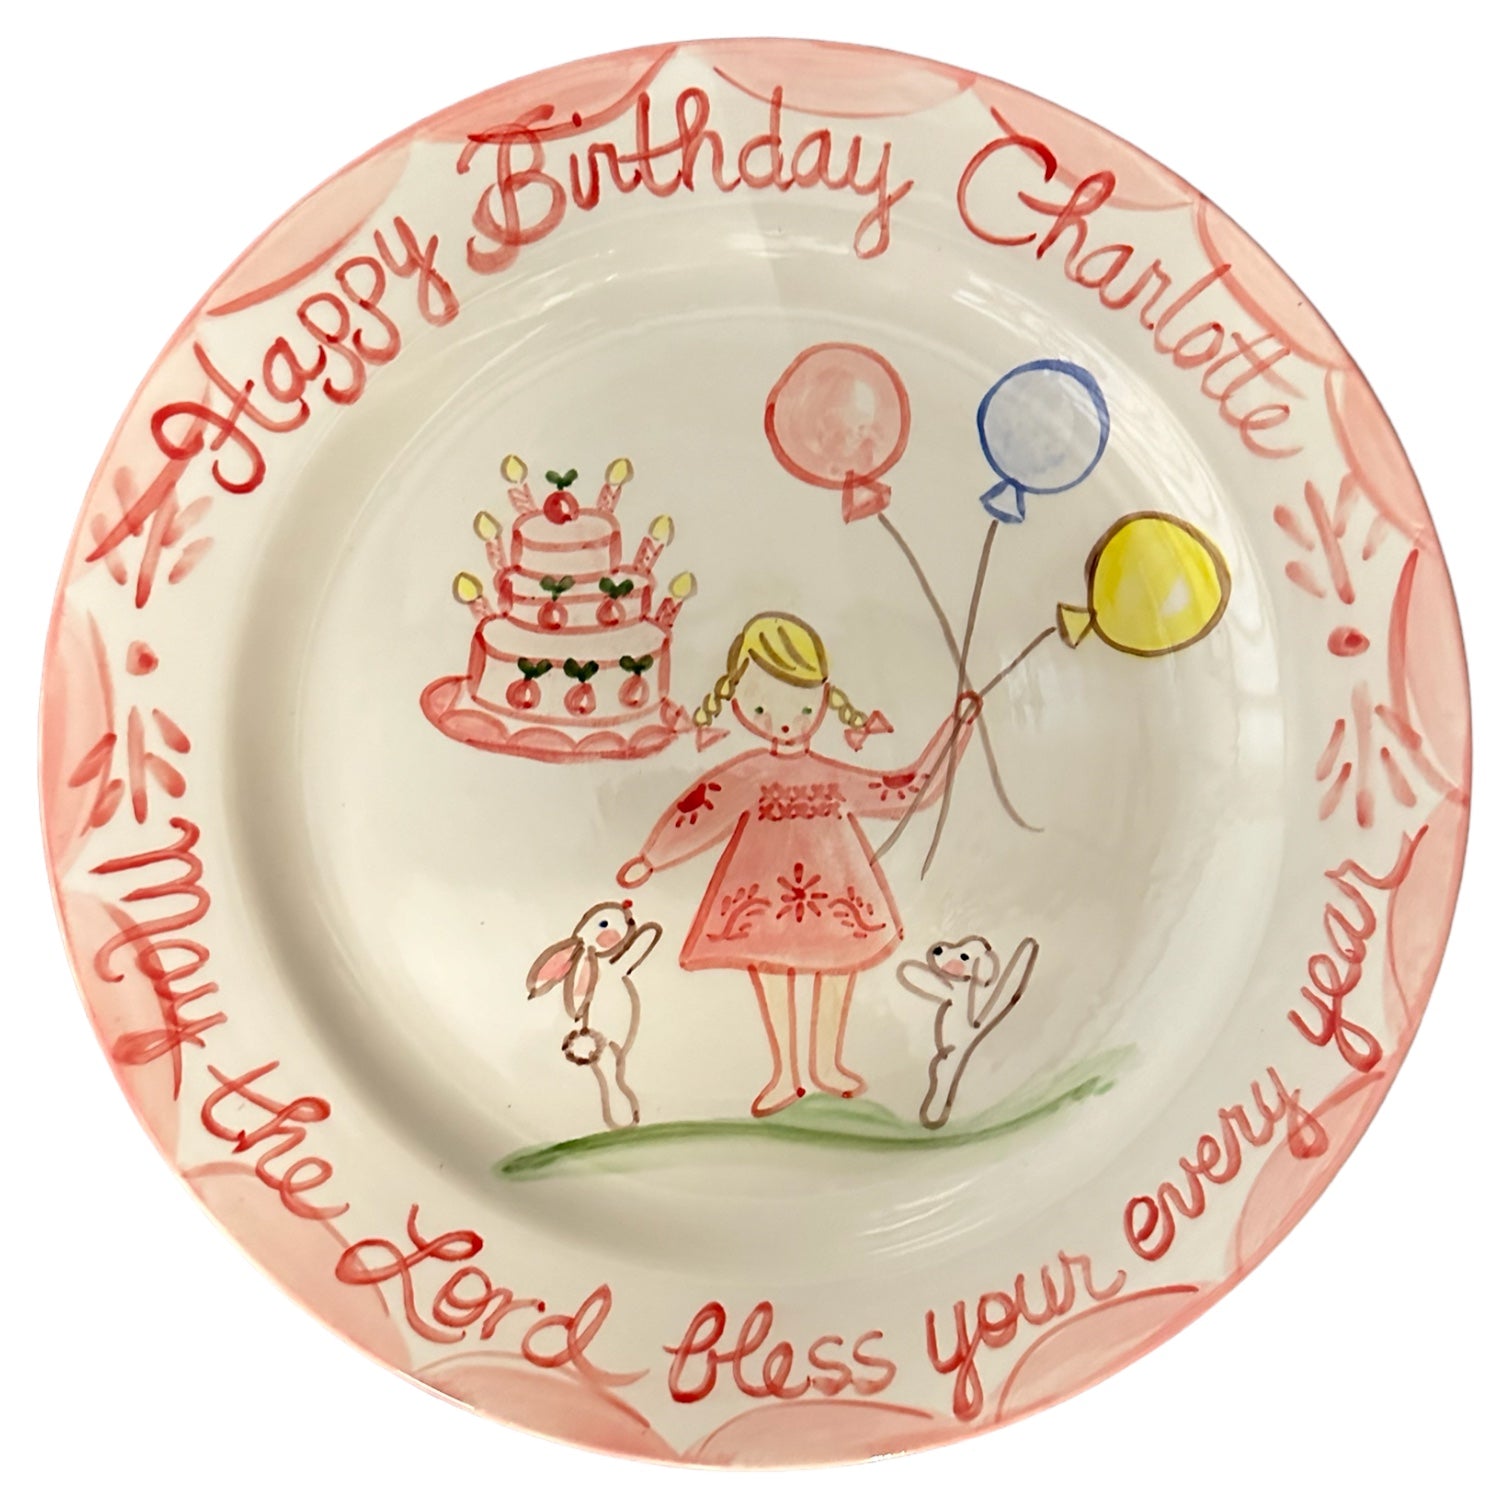 Birthday Plate - Pink Dress (Full Color) - Premium  from Tricia Lowenfield Shop 